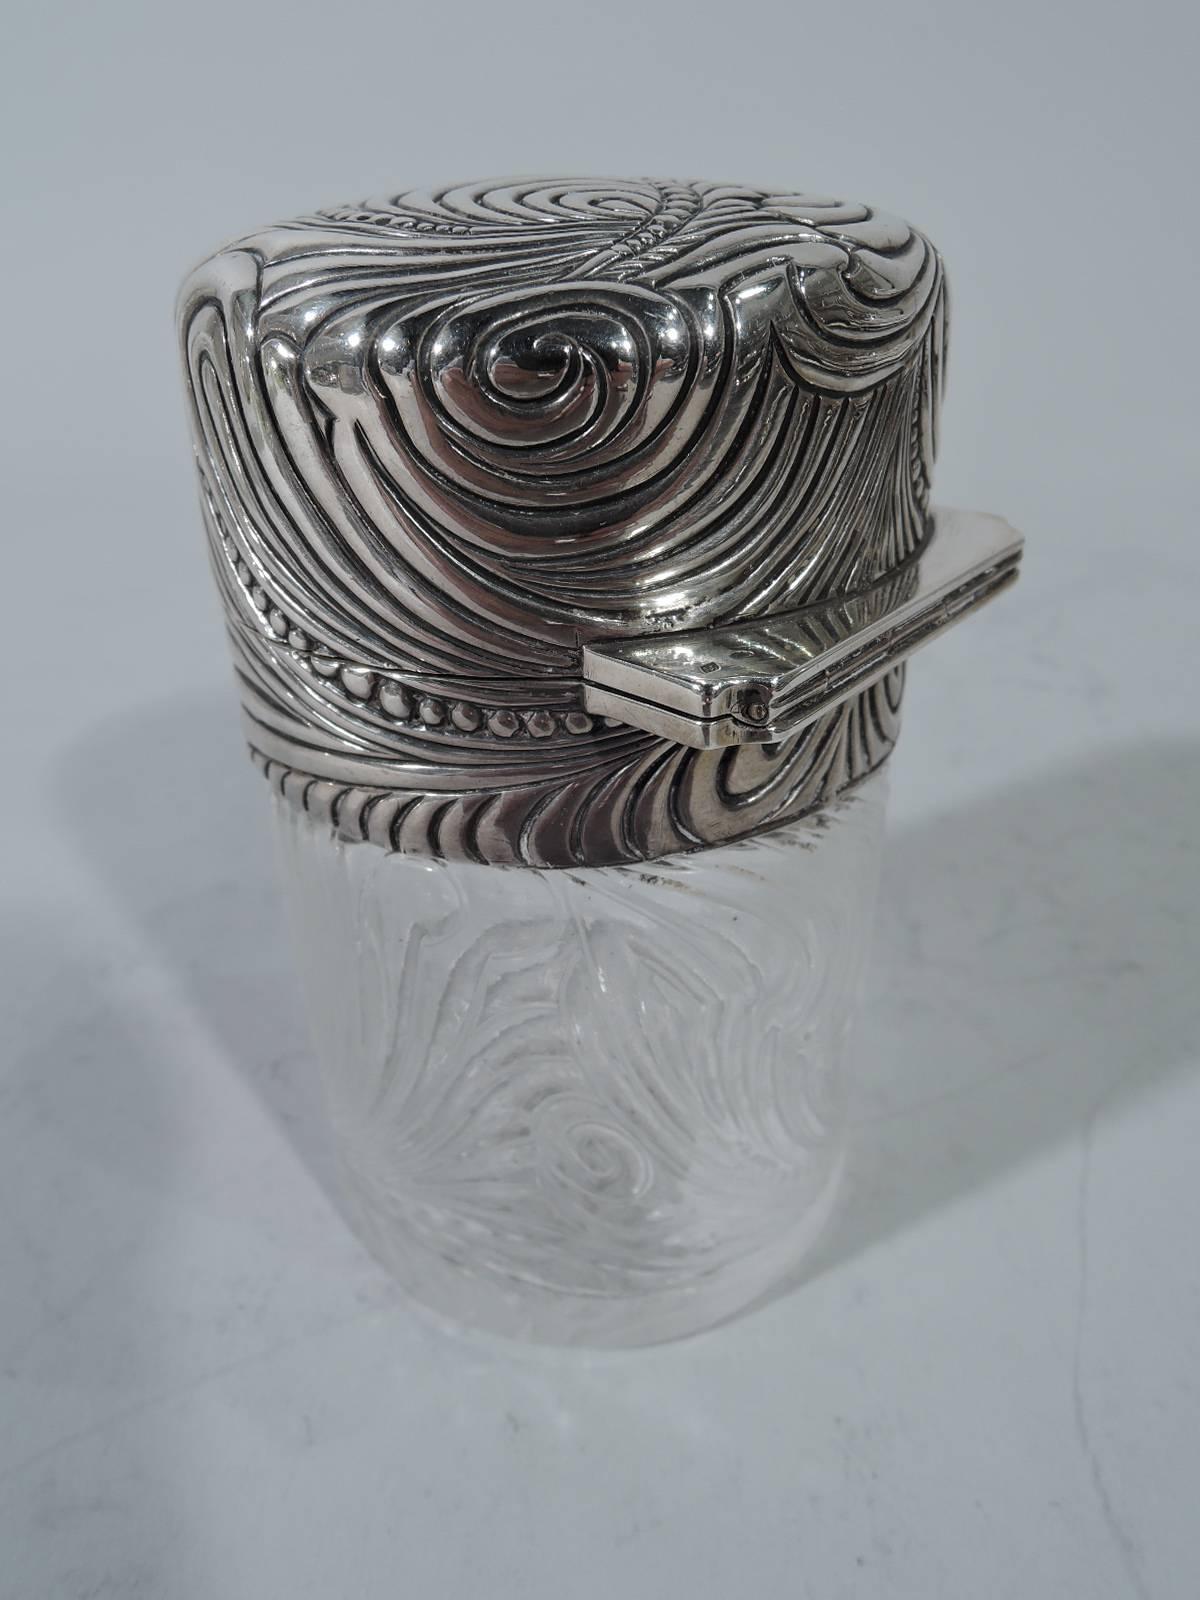 Art Nouveau silver and crystal vanity jar. Retailed by Tiffany & Co. in Paris. Cylindrical clear glass and silver collar with hinged cover. Interior stopper with short plug. Dense swirling and fluid scrollwork heightened with beading. French marks